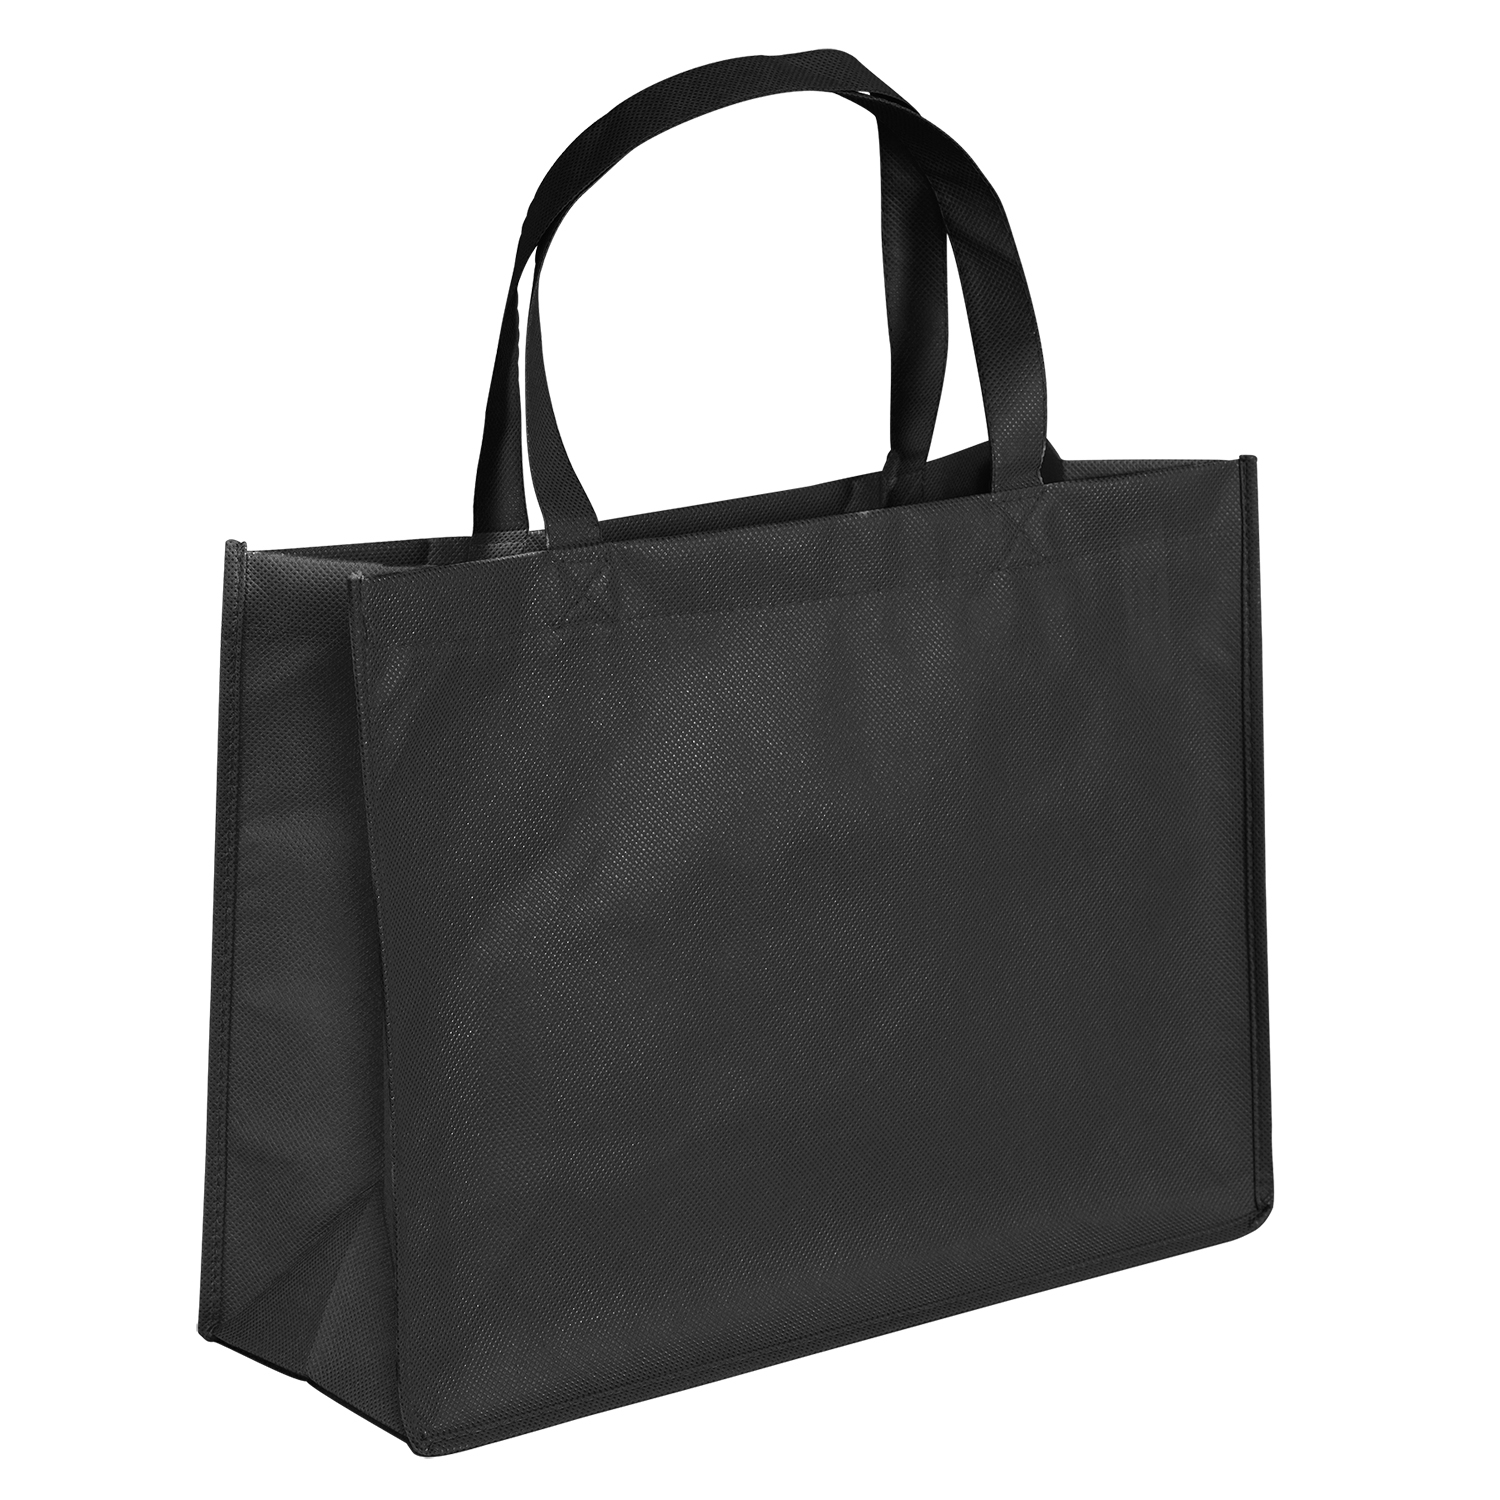 Bag Makers CVPS1612 - Custom Printed Eco-Friendly Promotional Non-Woven Grocery Tote Bag